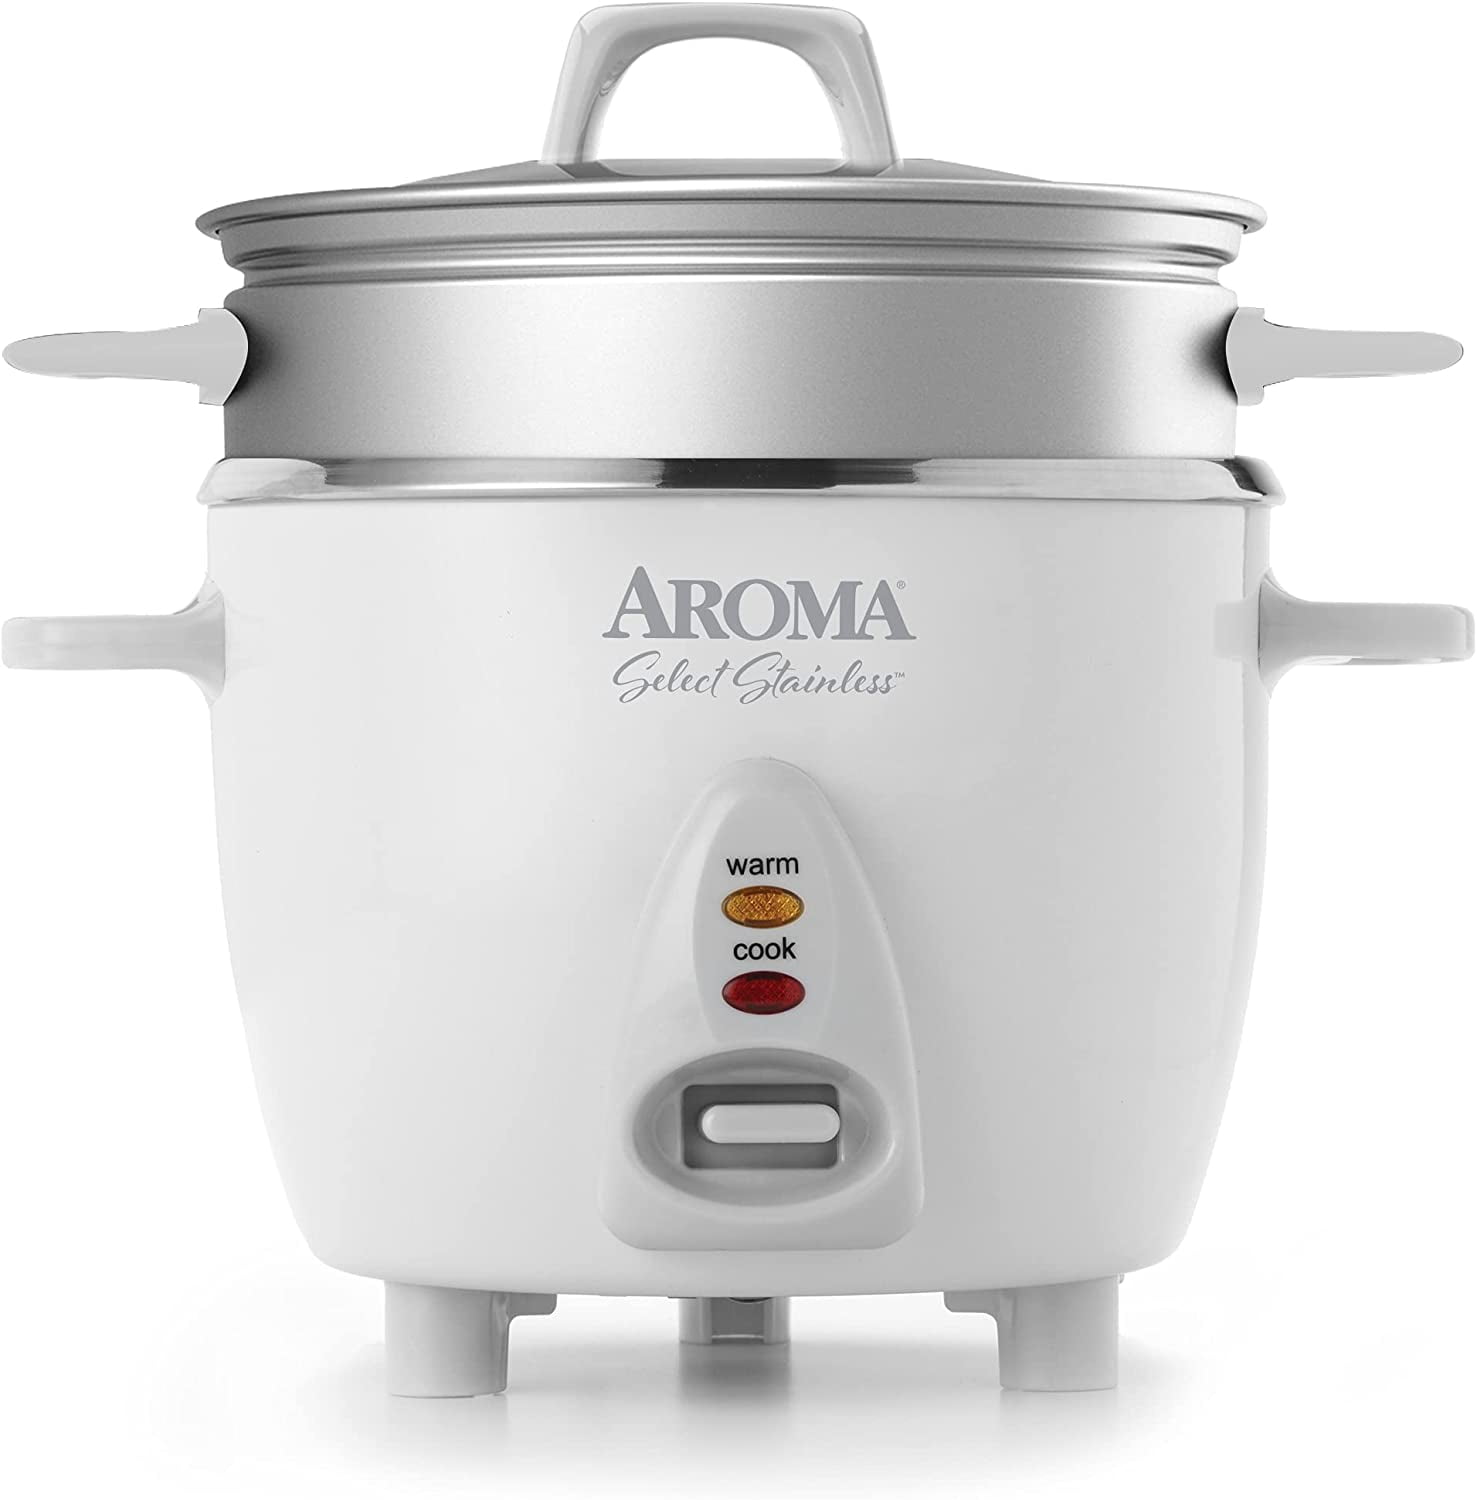 Aroma Housewares Pot Review: One Appliance That Does It All